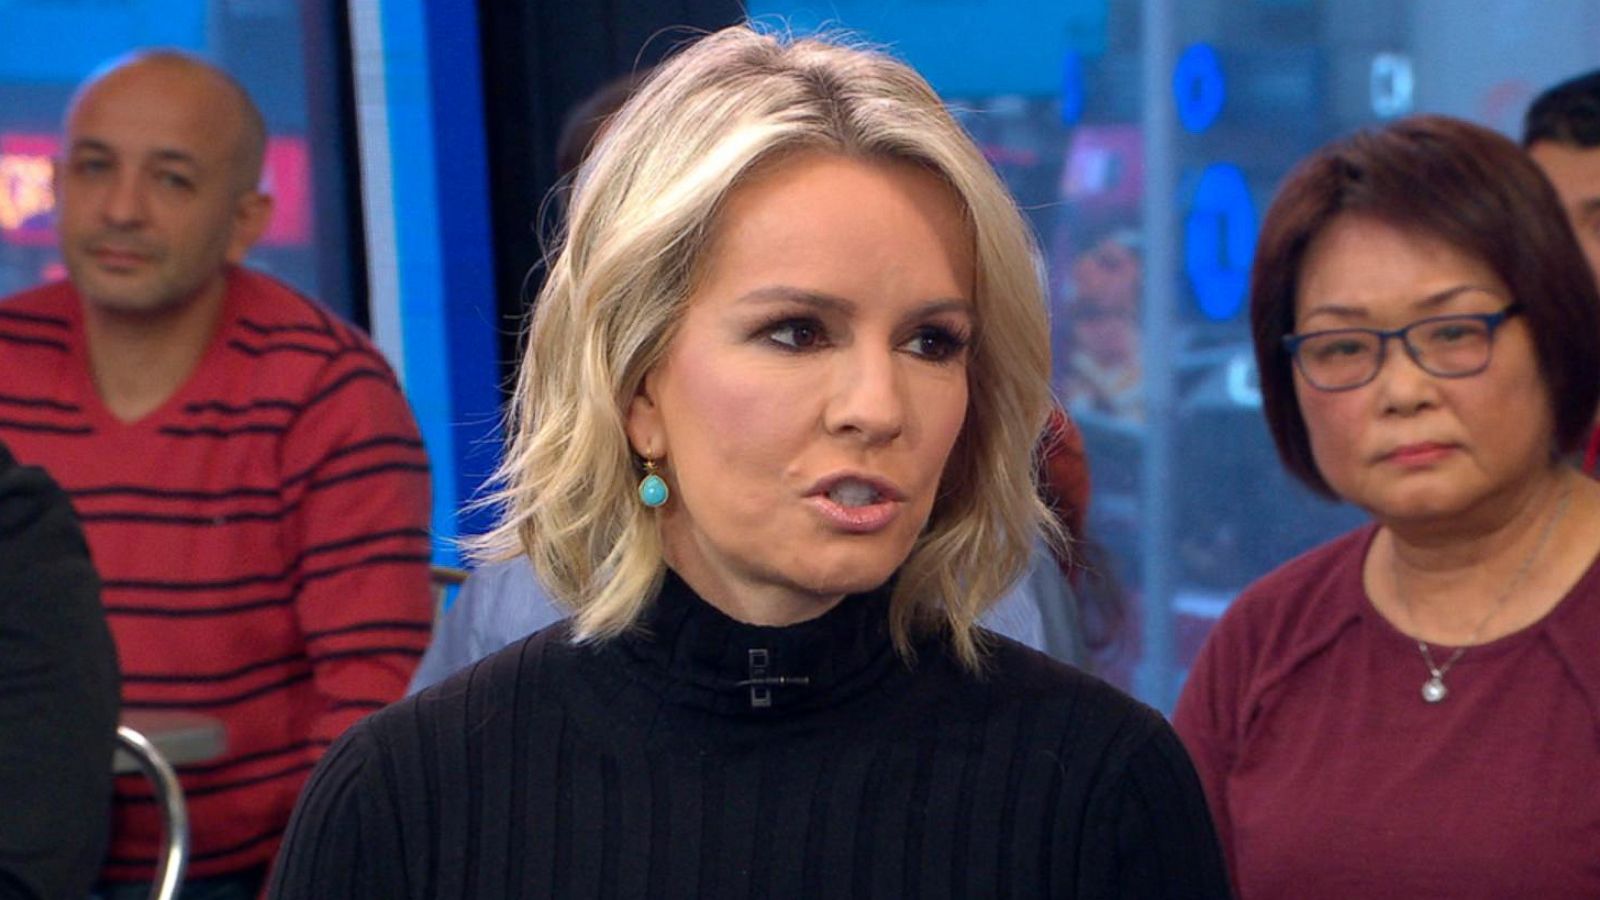 PHOTO: ABC News chief medical correspondent Dr. Jennifer Ashton discusses her experience with Dry January on "Good Morning America."